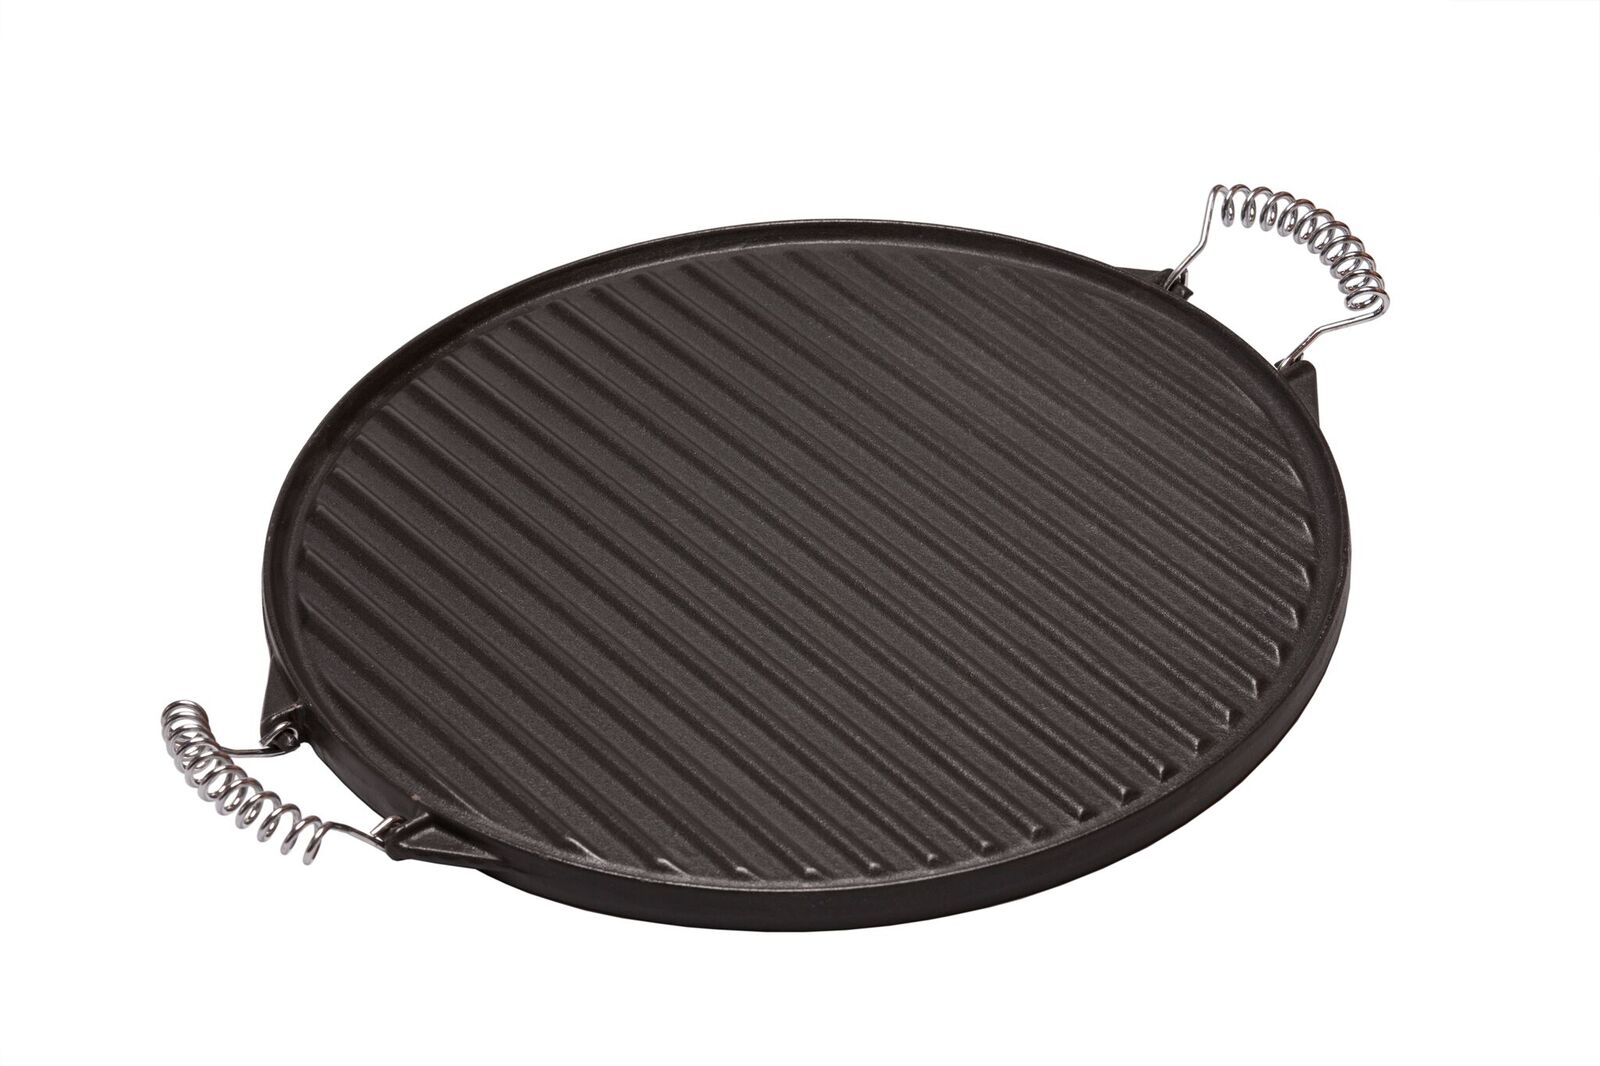 The Benefits of a Plancha Grill